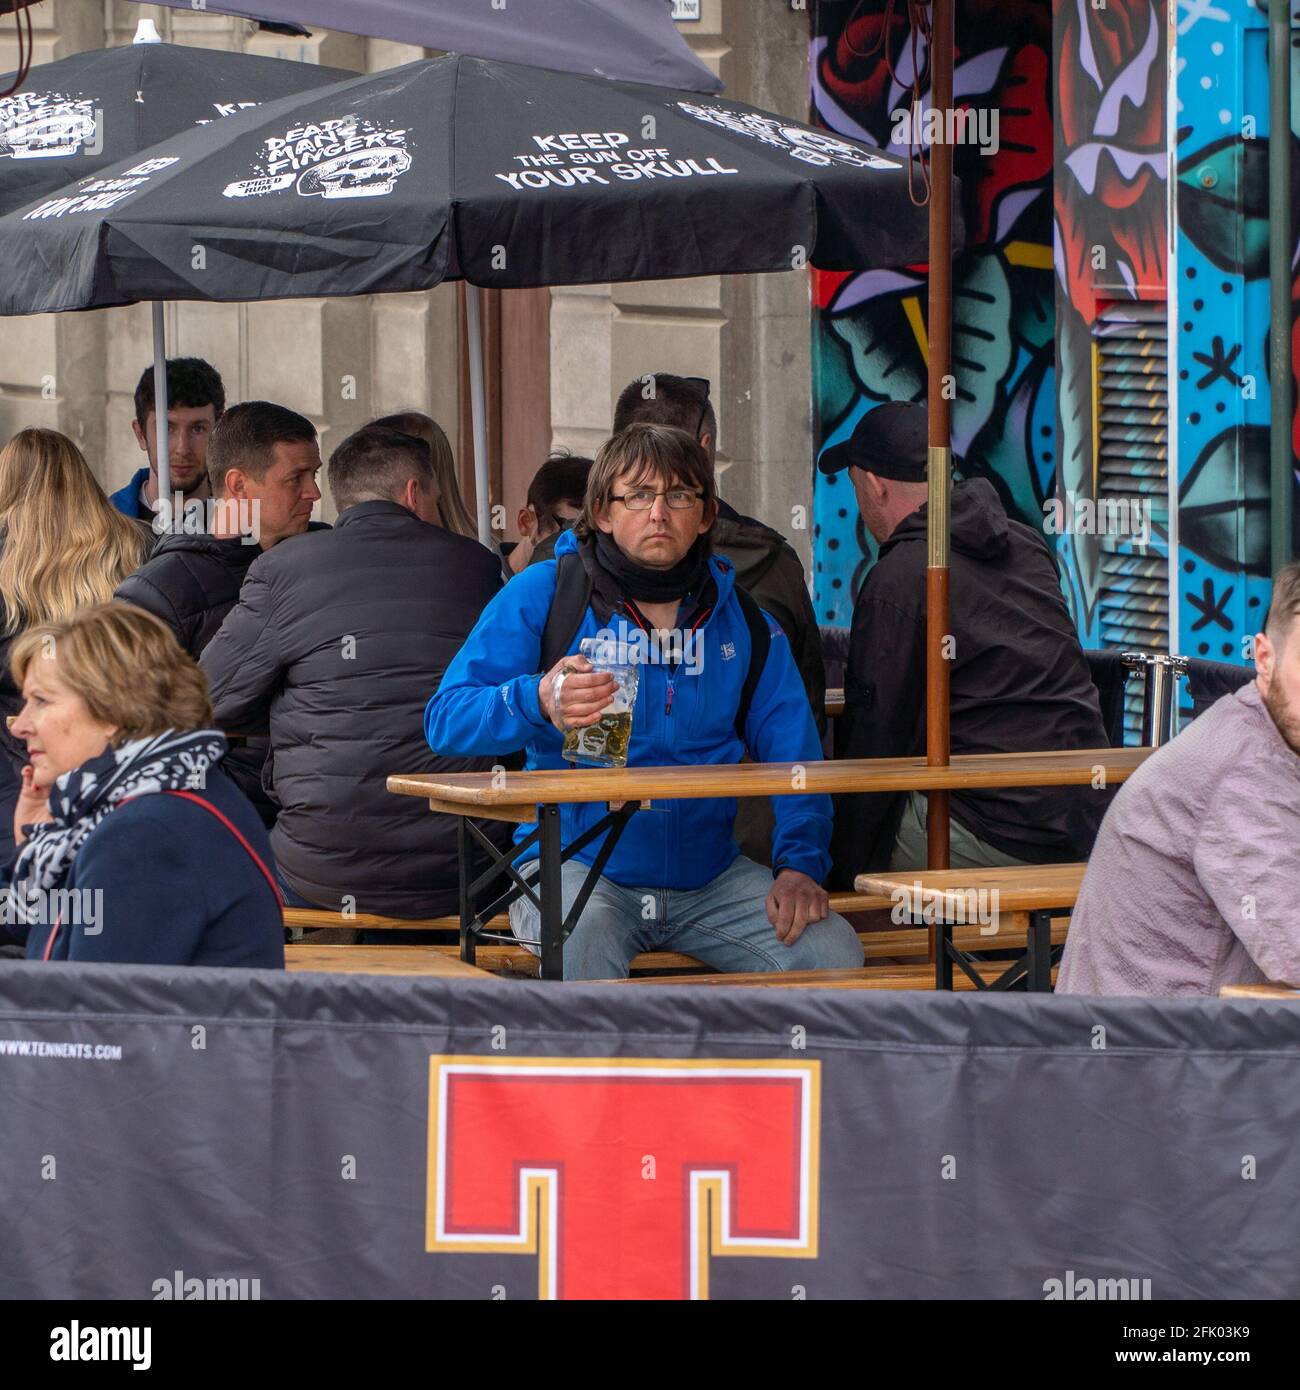 Dundee, Tayside, Scotland 26th of Apr 2021: Pubs with beer gardens open throughout Dundee city centre, as the scottish government relax the lock down restrictions, which see business opening up, and some normality returning to people lives. Stock Photo